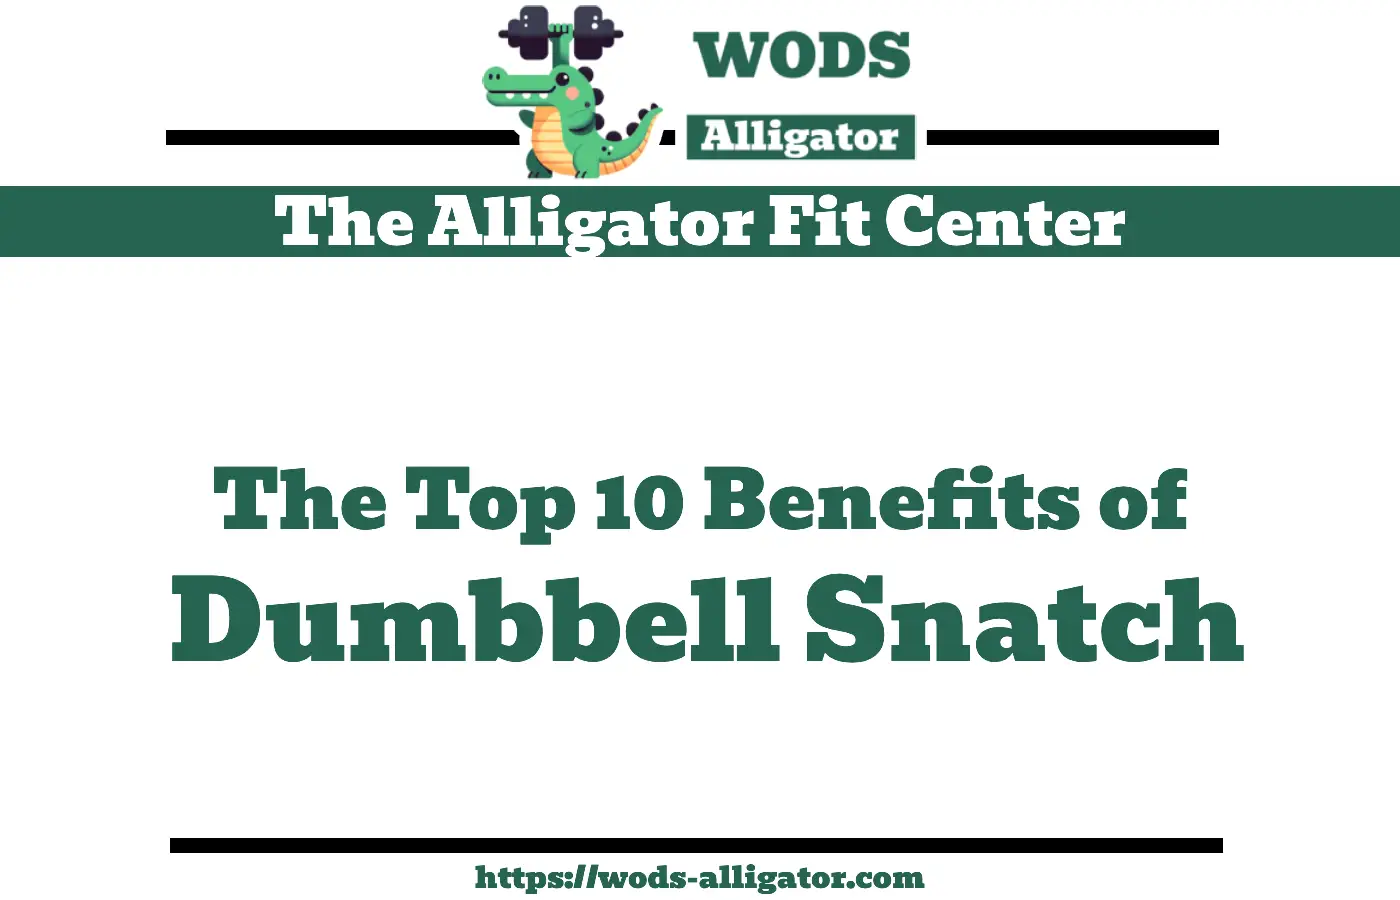 Header Image The Top 10 Benefits of Dumbbell Snatch